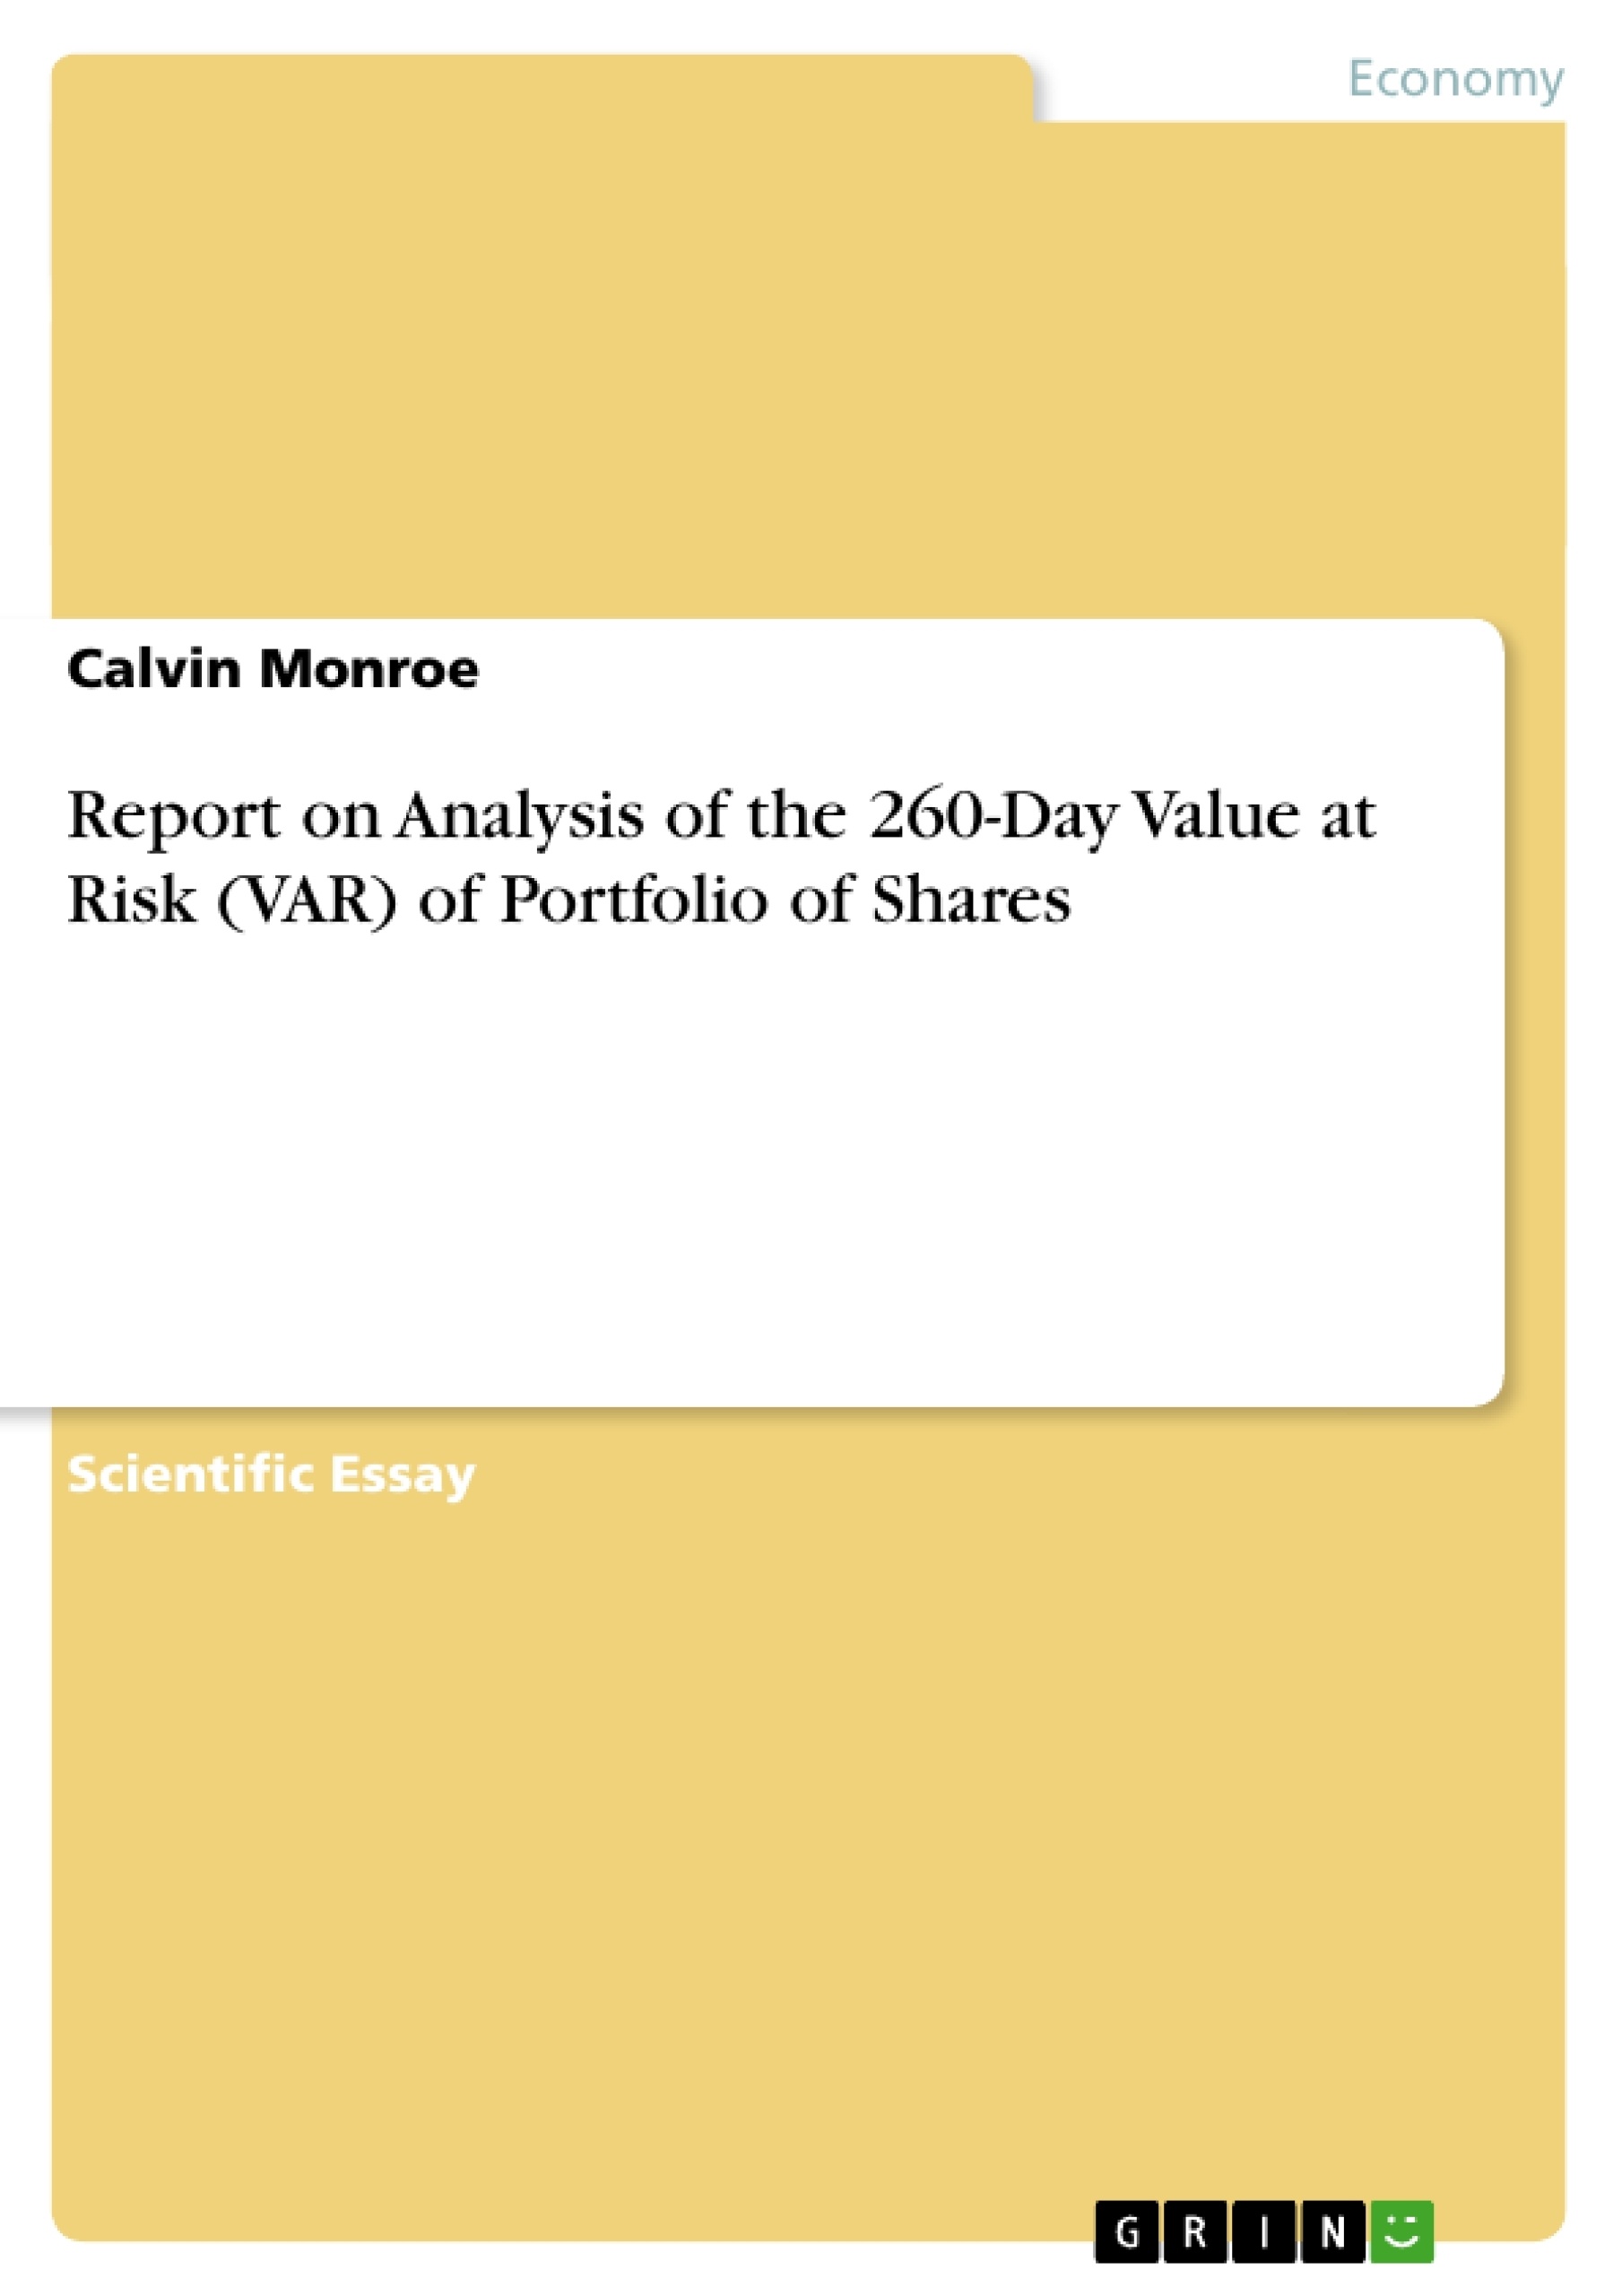 Title: Report on Analysis of the 260-Day Value at Risk (VAR) of Portfolio of Shares